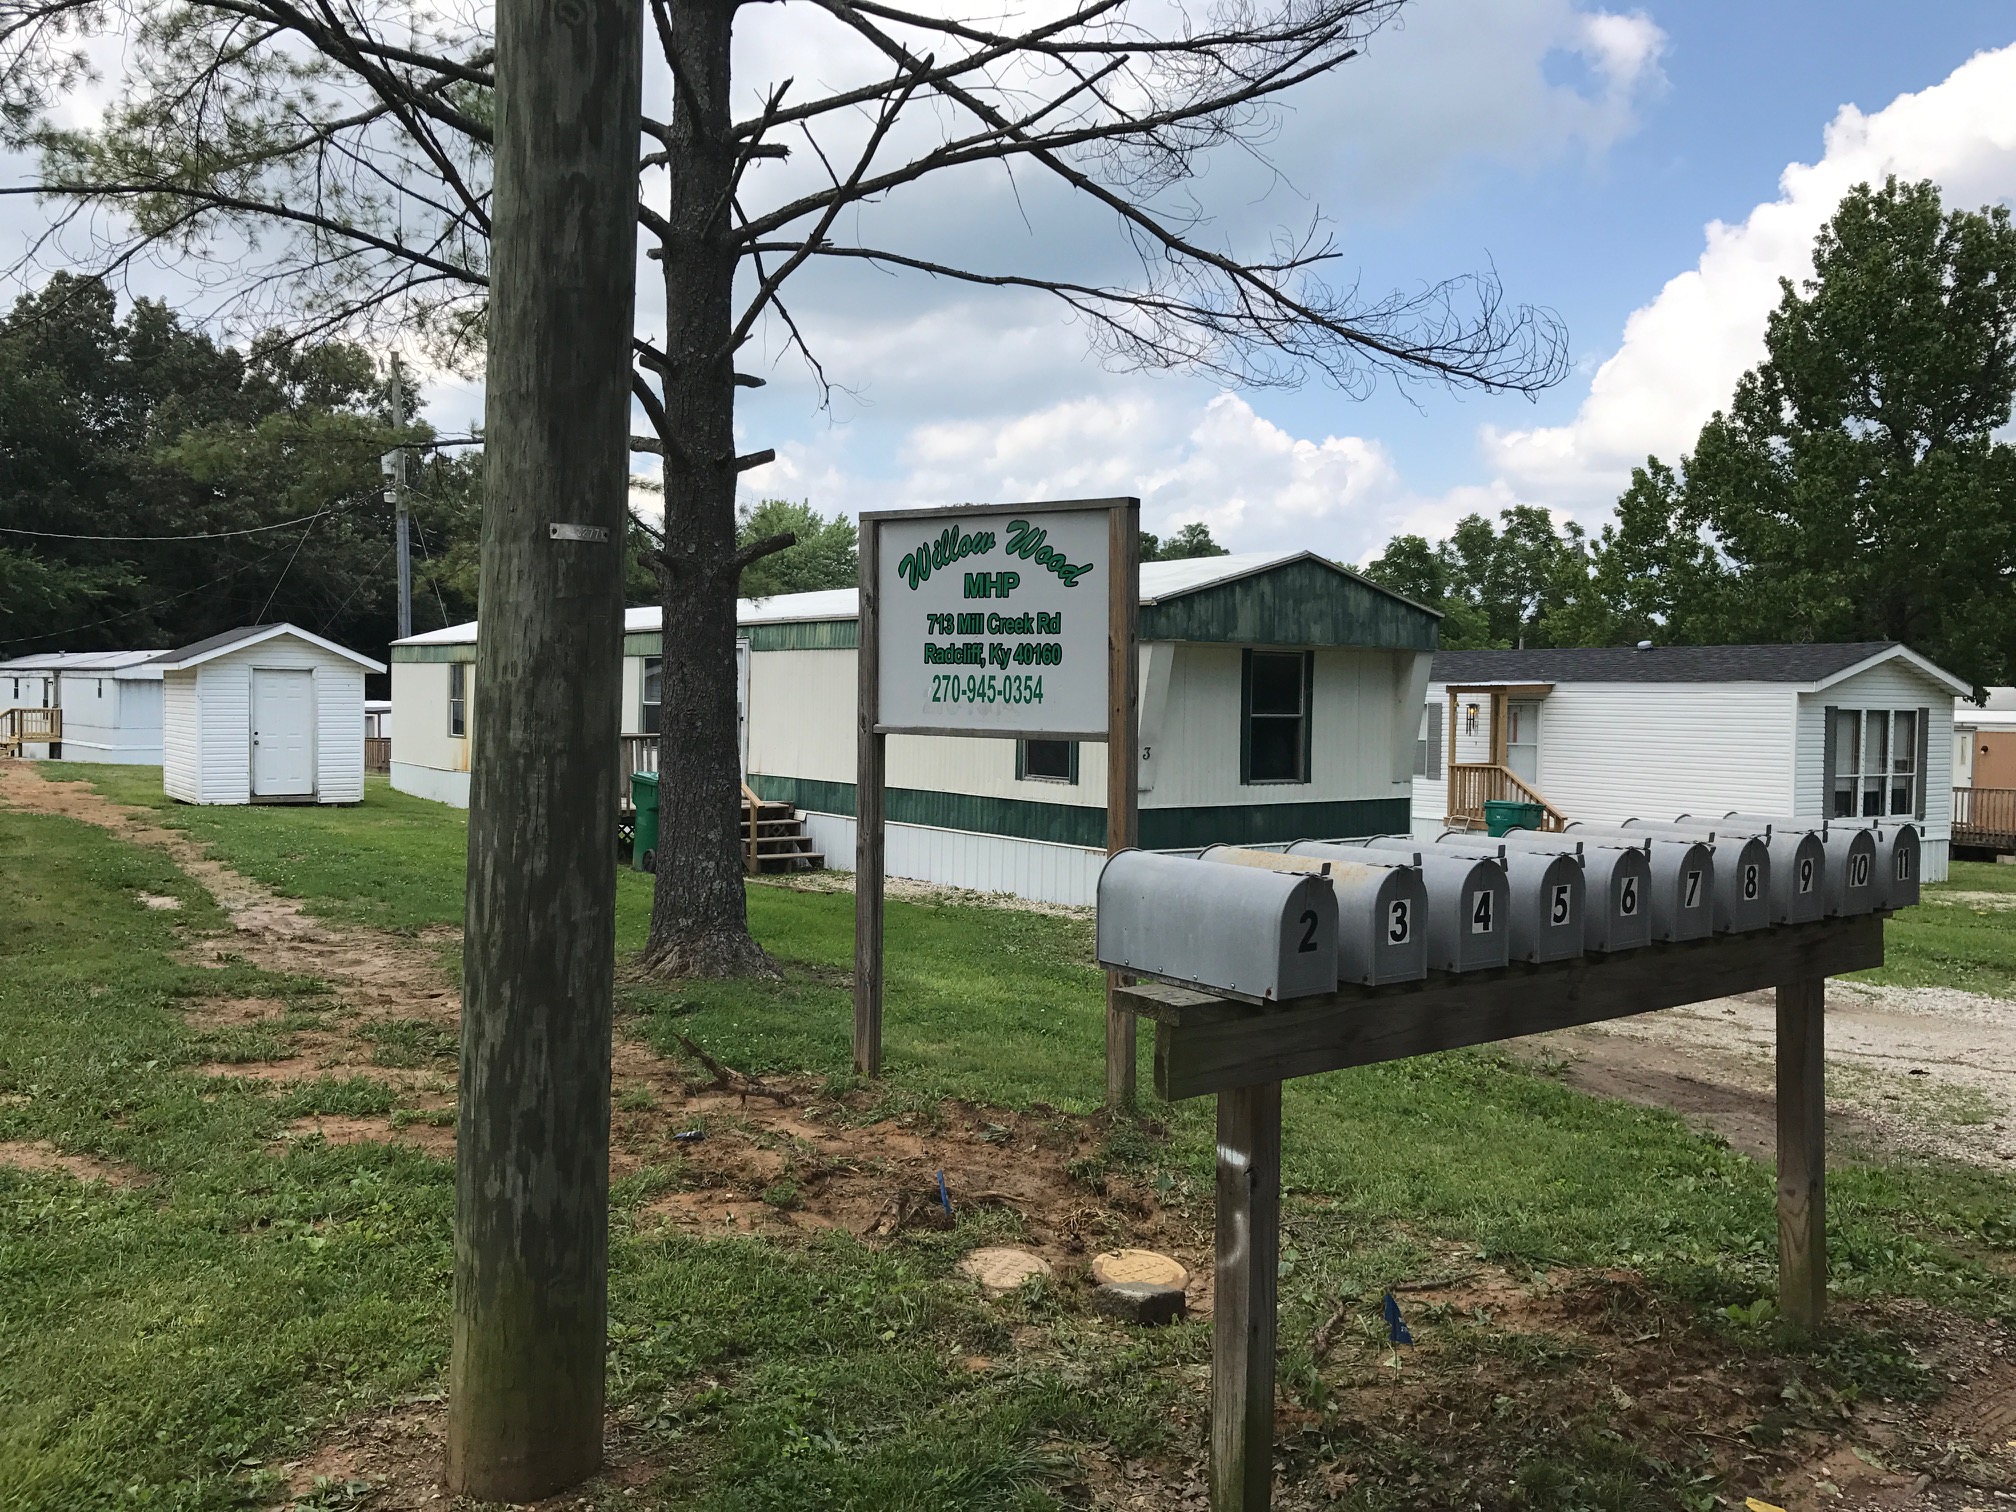 Willow Wood Mobile Home Park 713 Millcreek Road, Radcliff, KY 40160